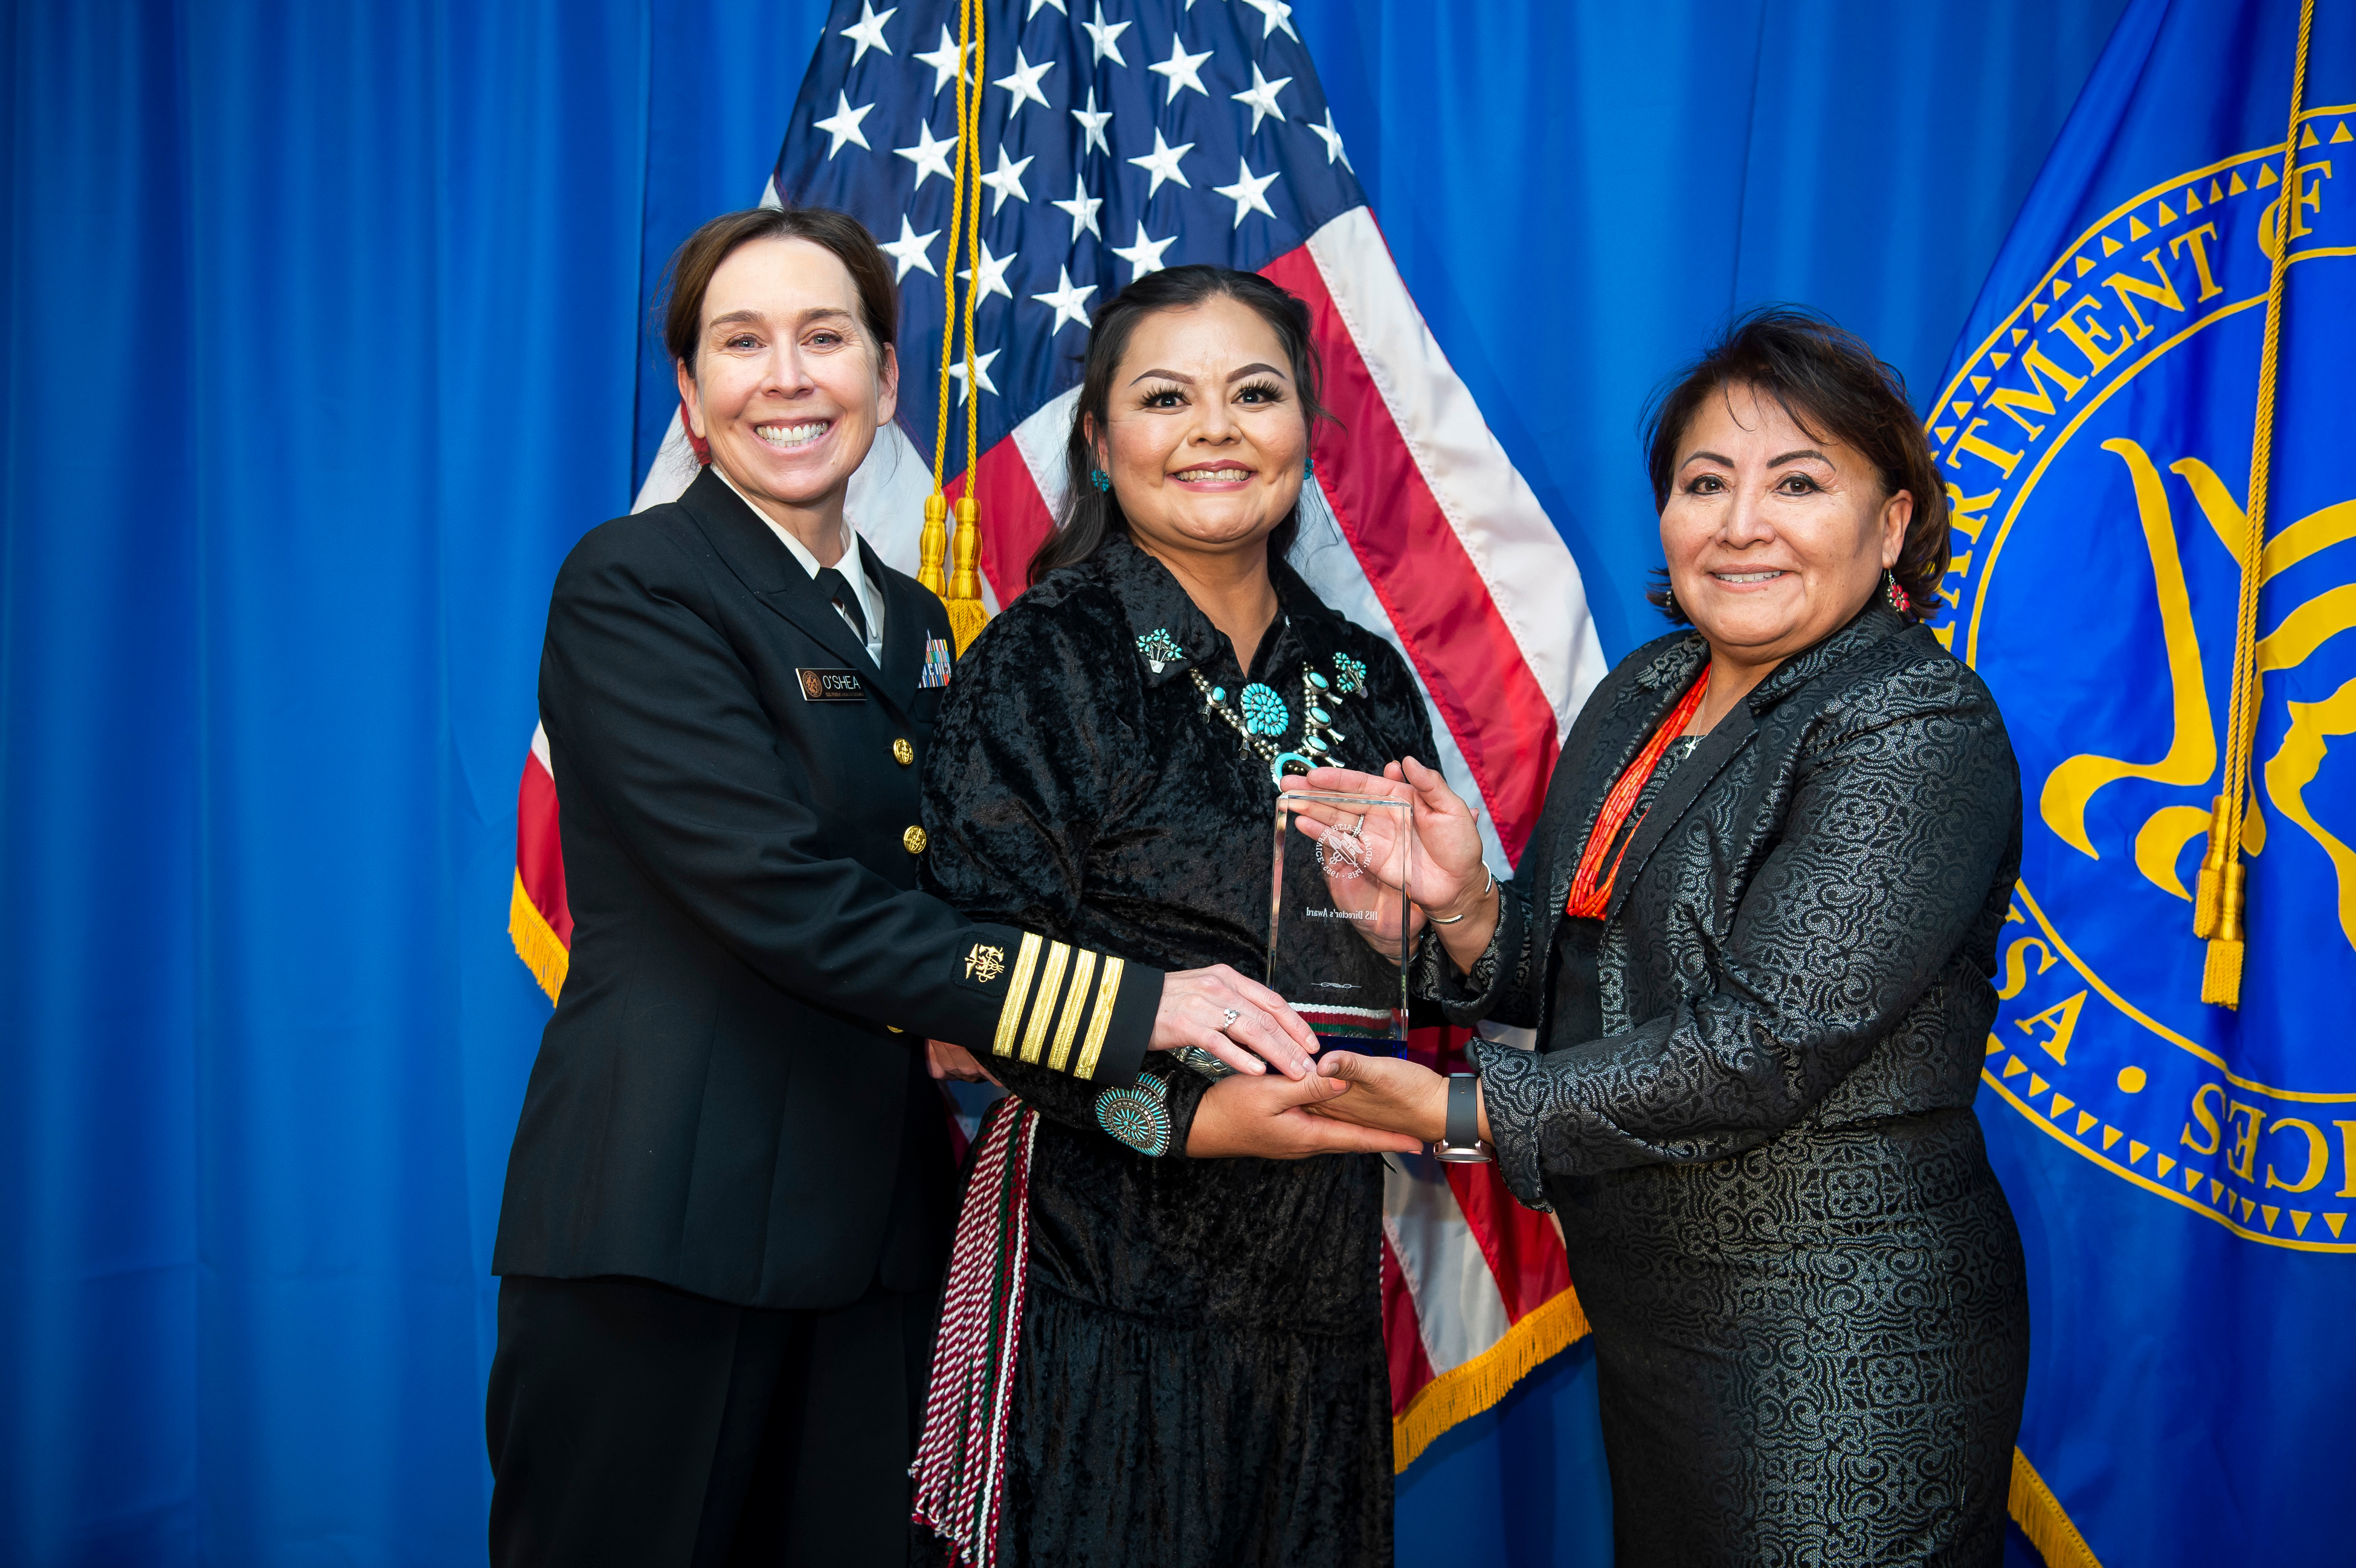 Pandemic Heroism - Team Category - CAPT Sheryl O'Shea & Jerrilyn Manning receiving on behalf of Canoncito Band of Navajos Health Center Staff (Albuquerque )